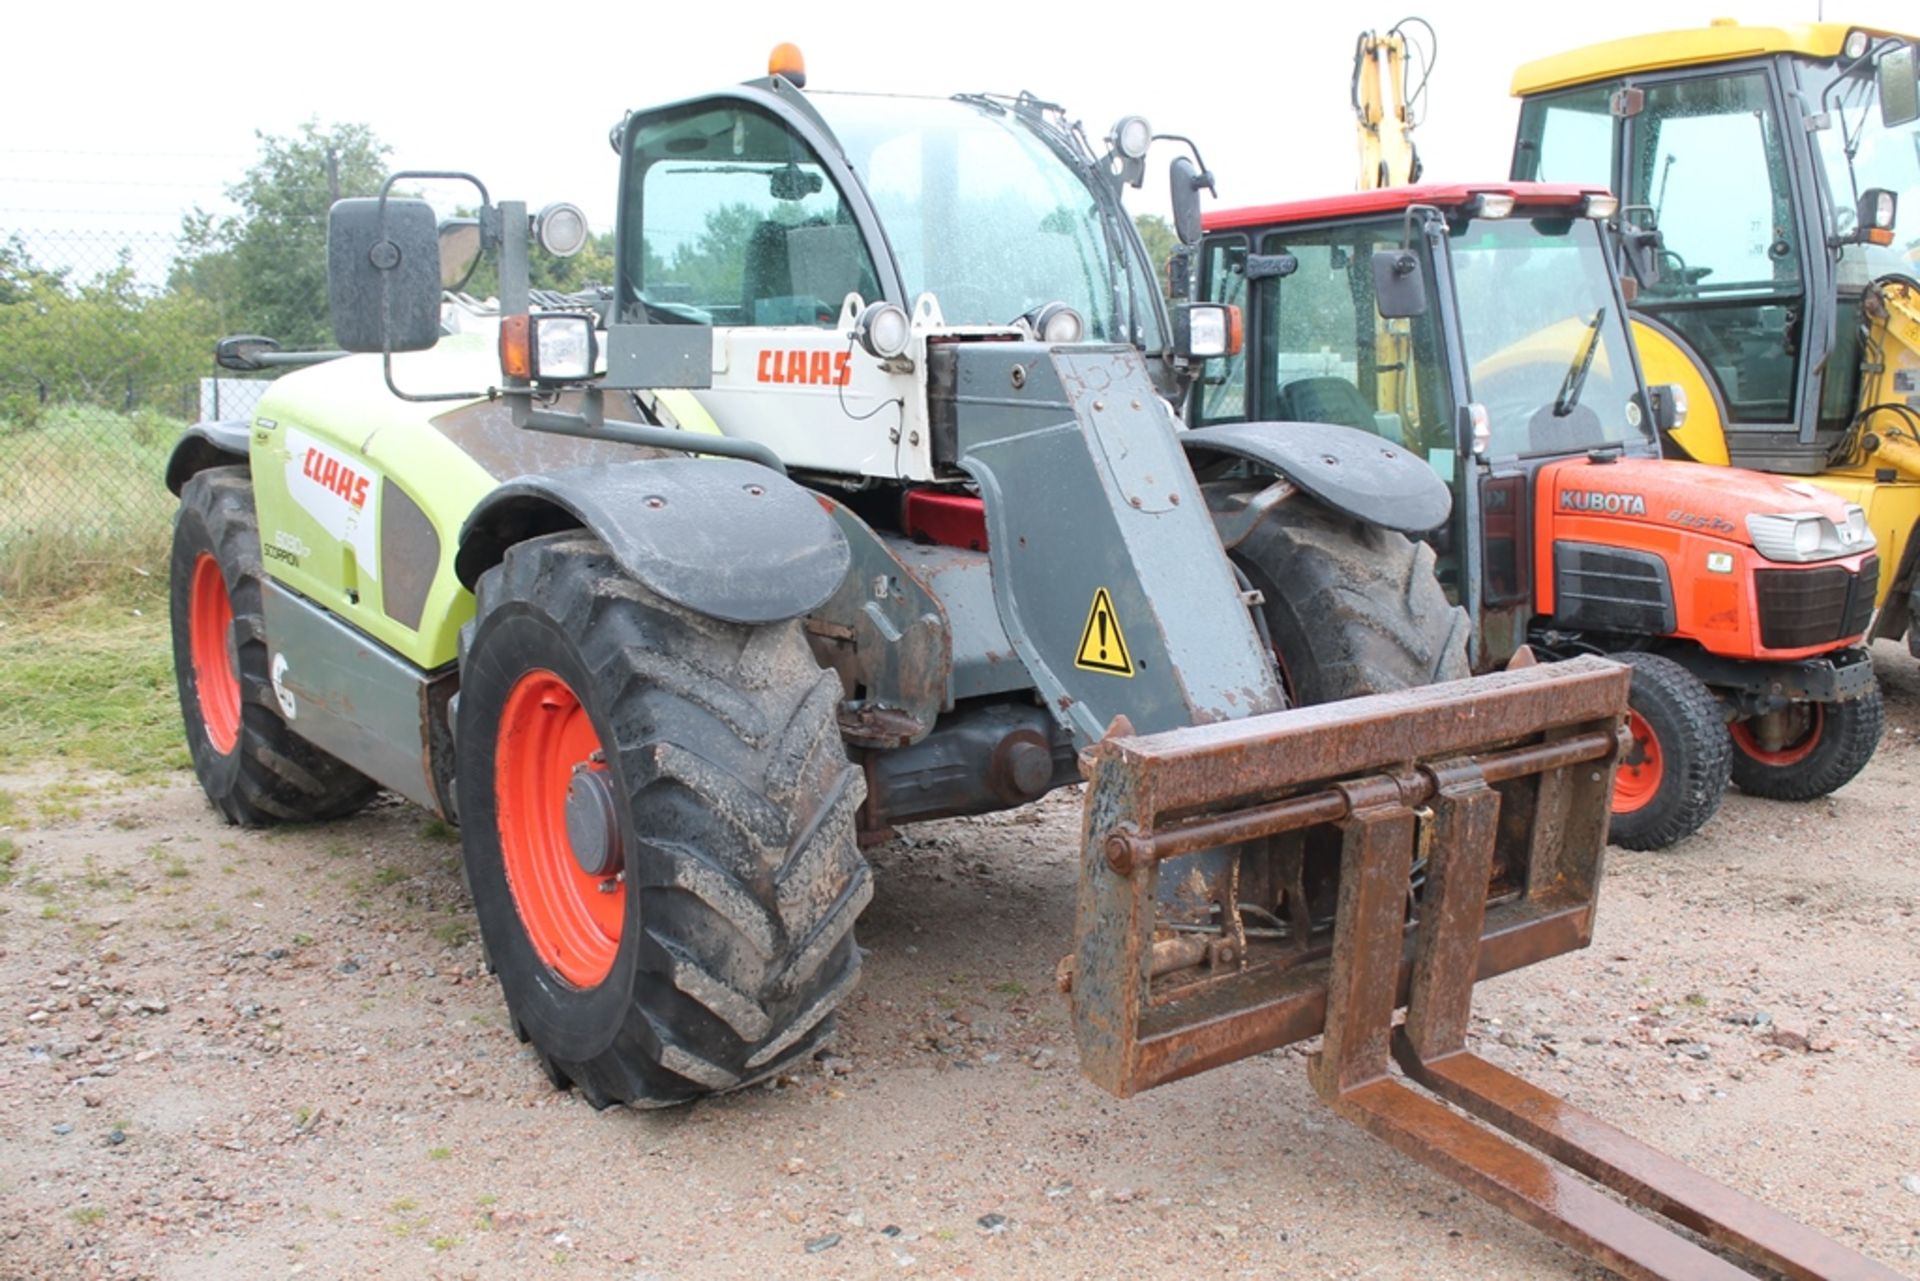 Claas G030 CP - 4040cc Tractor - Image 4 of 4